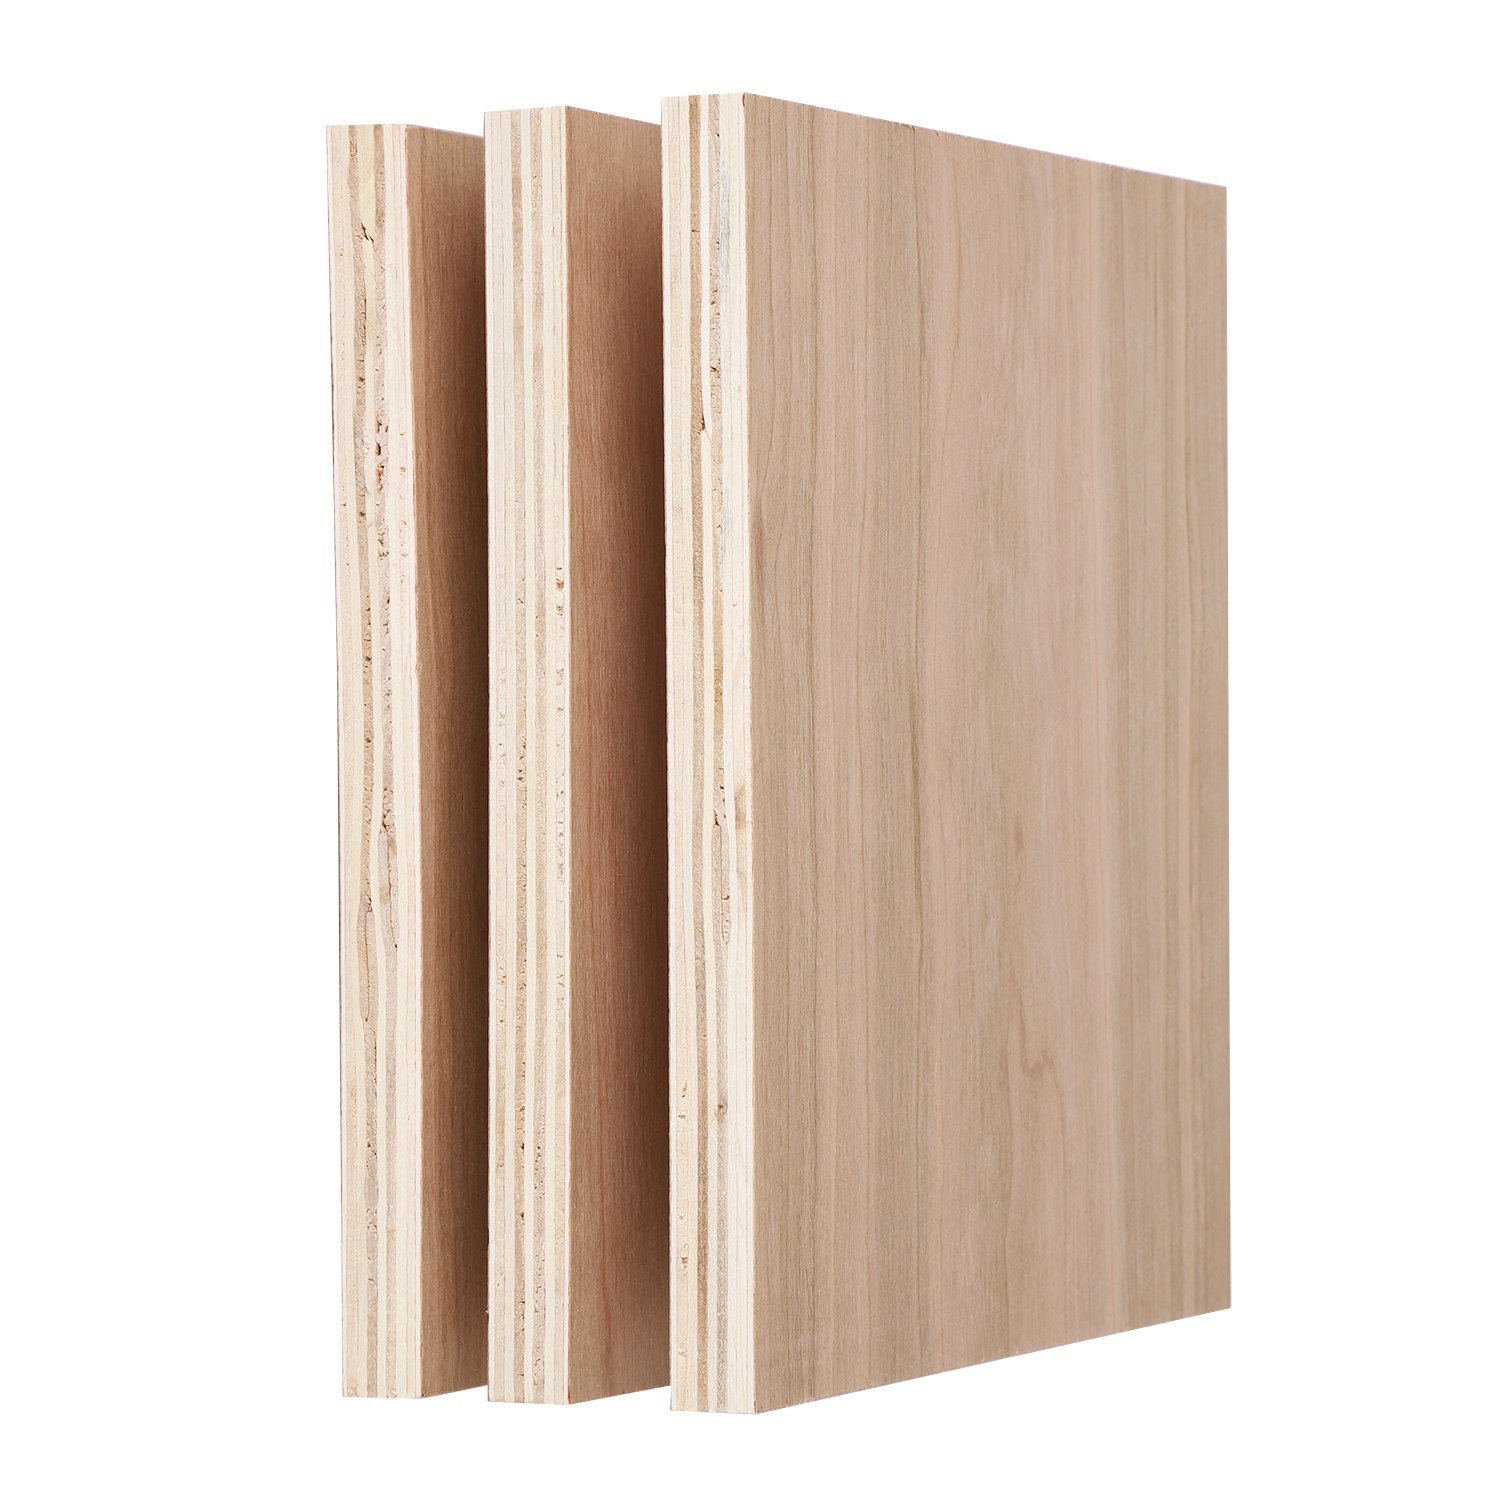 Top Grade Cherry Wood Faced Plywood Board for Furniture